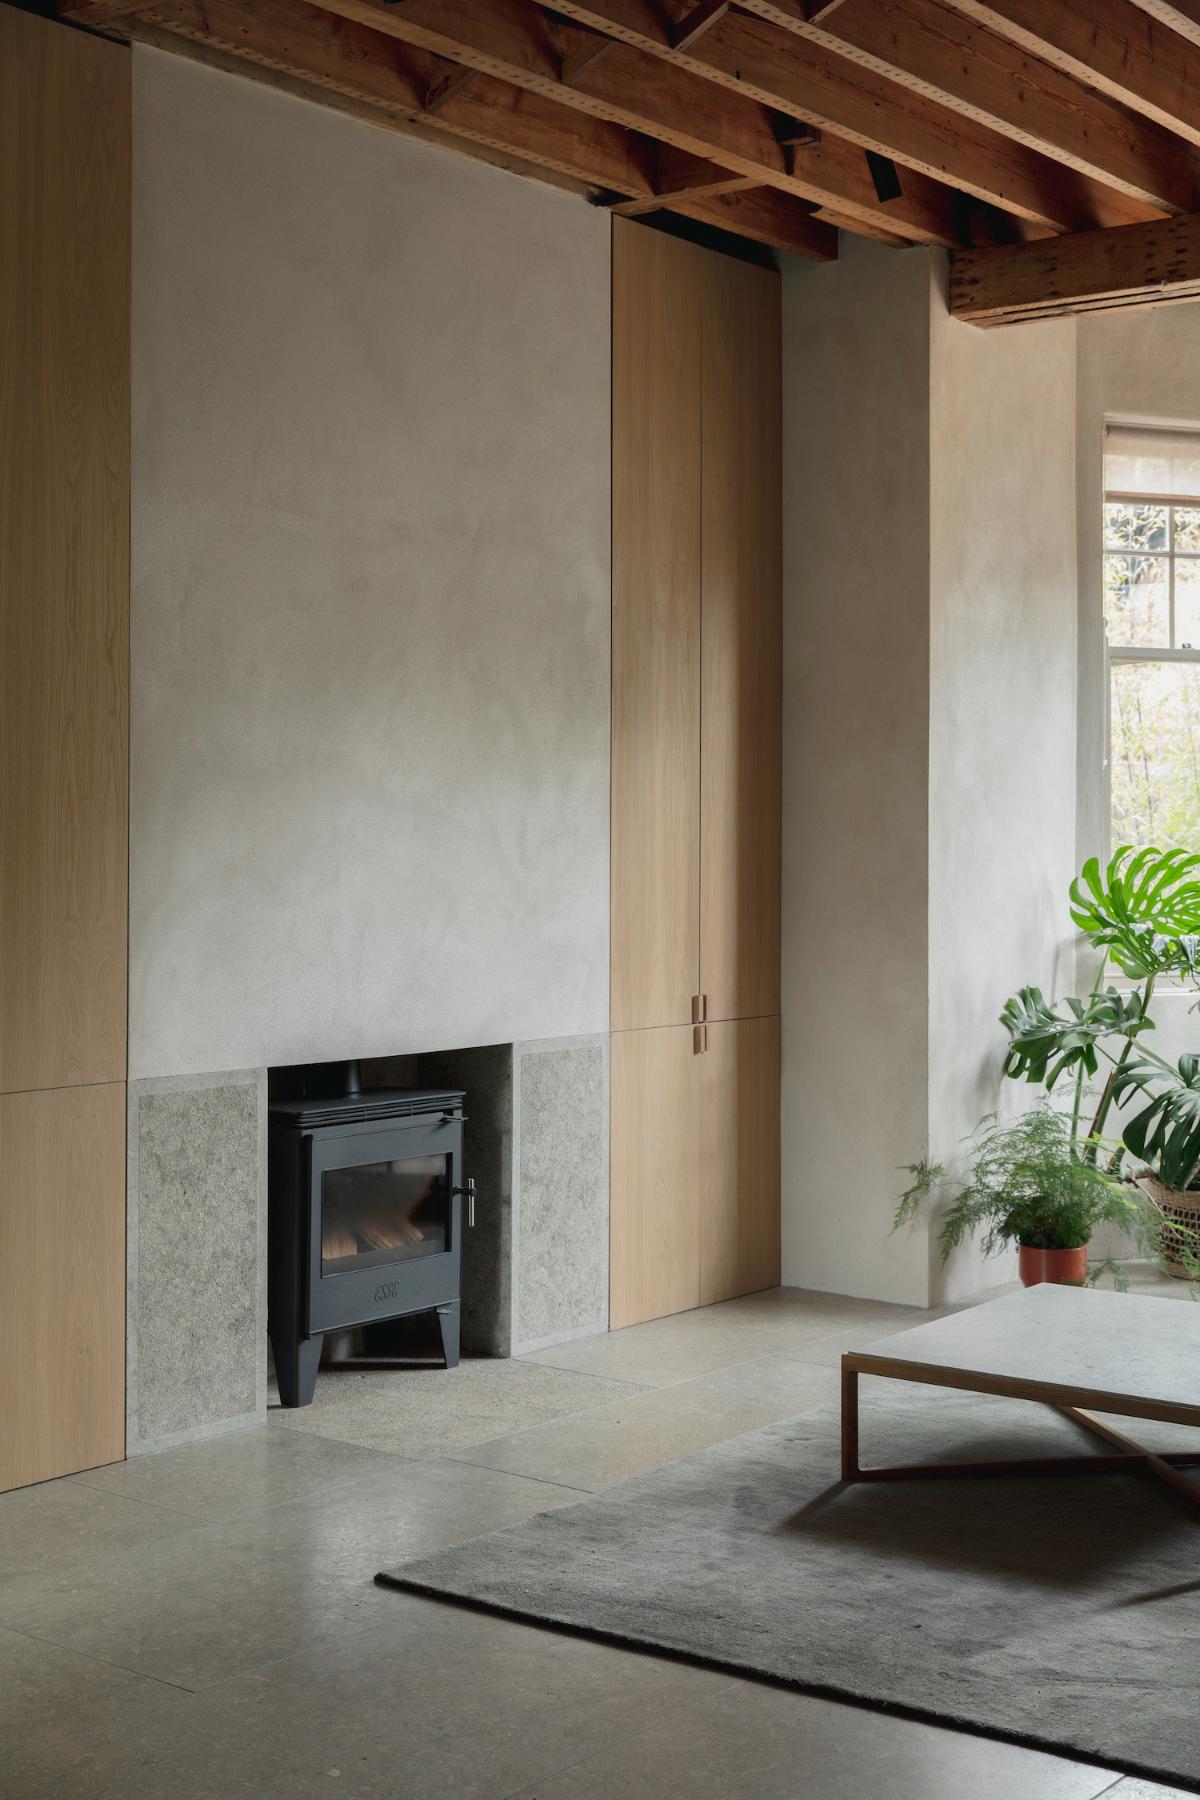 An Edwardian Terrace in London Transformed to a Low Energy House